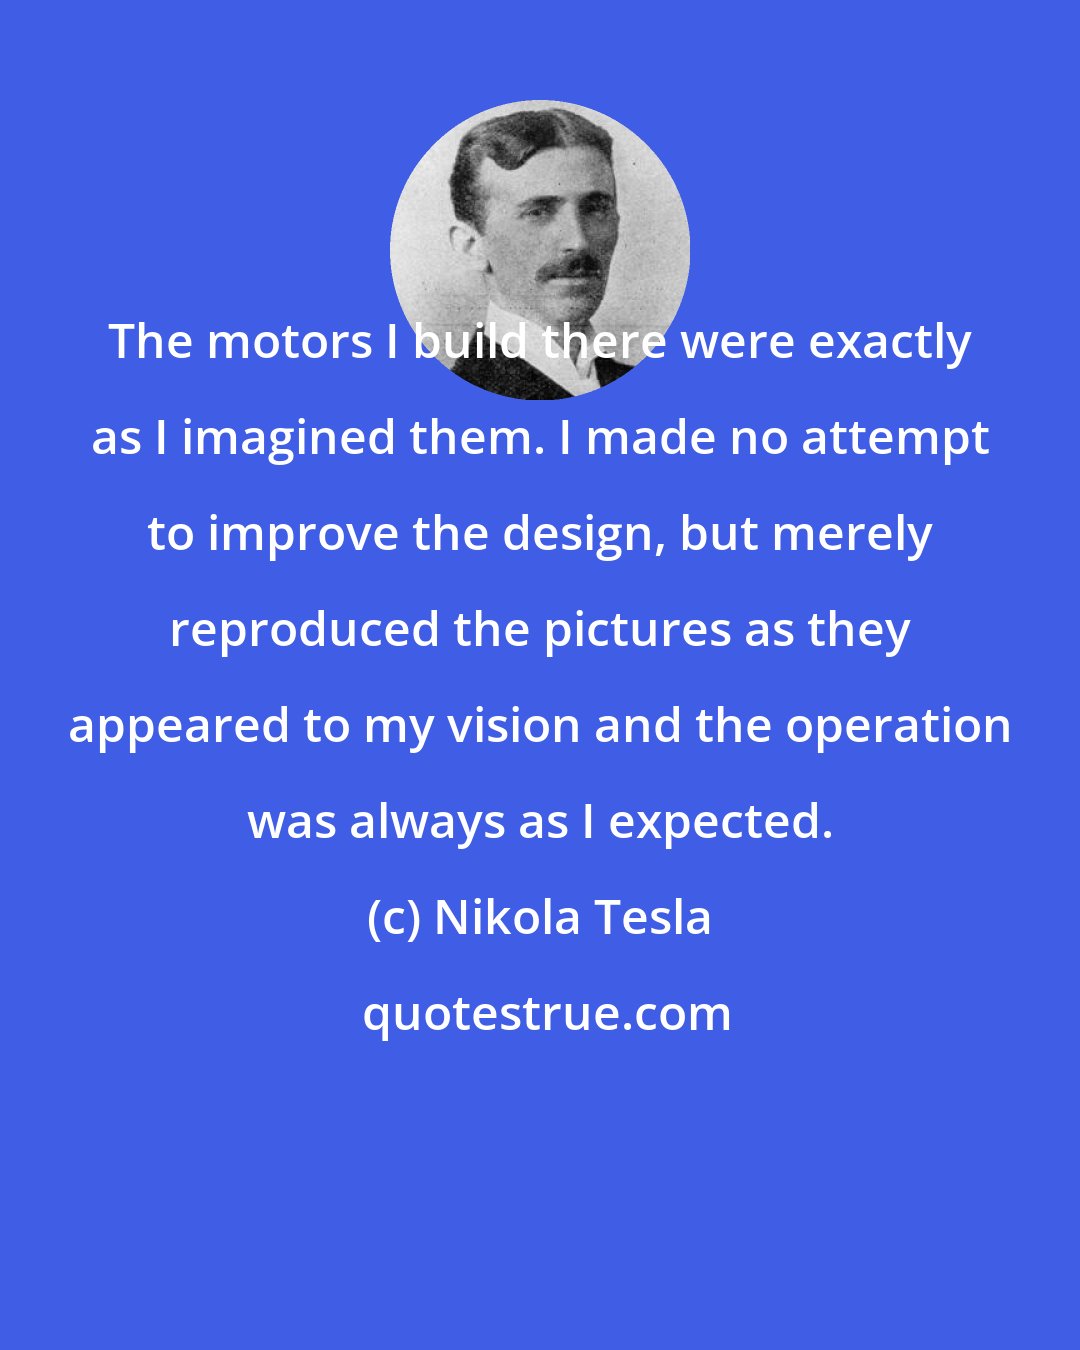 Nikola Tesla: The motors I build there were exactly as I imagined them. I made no attempt to improve the design, but merely reproduced the pictures as they appeared to my vision and the operation was always as I expected.